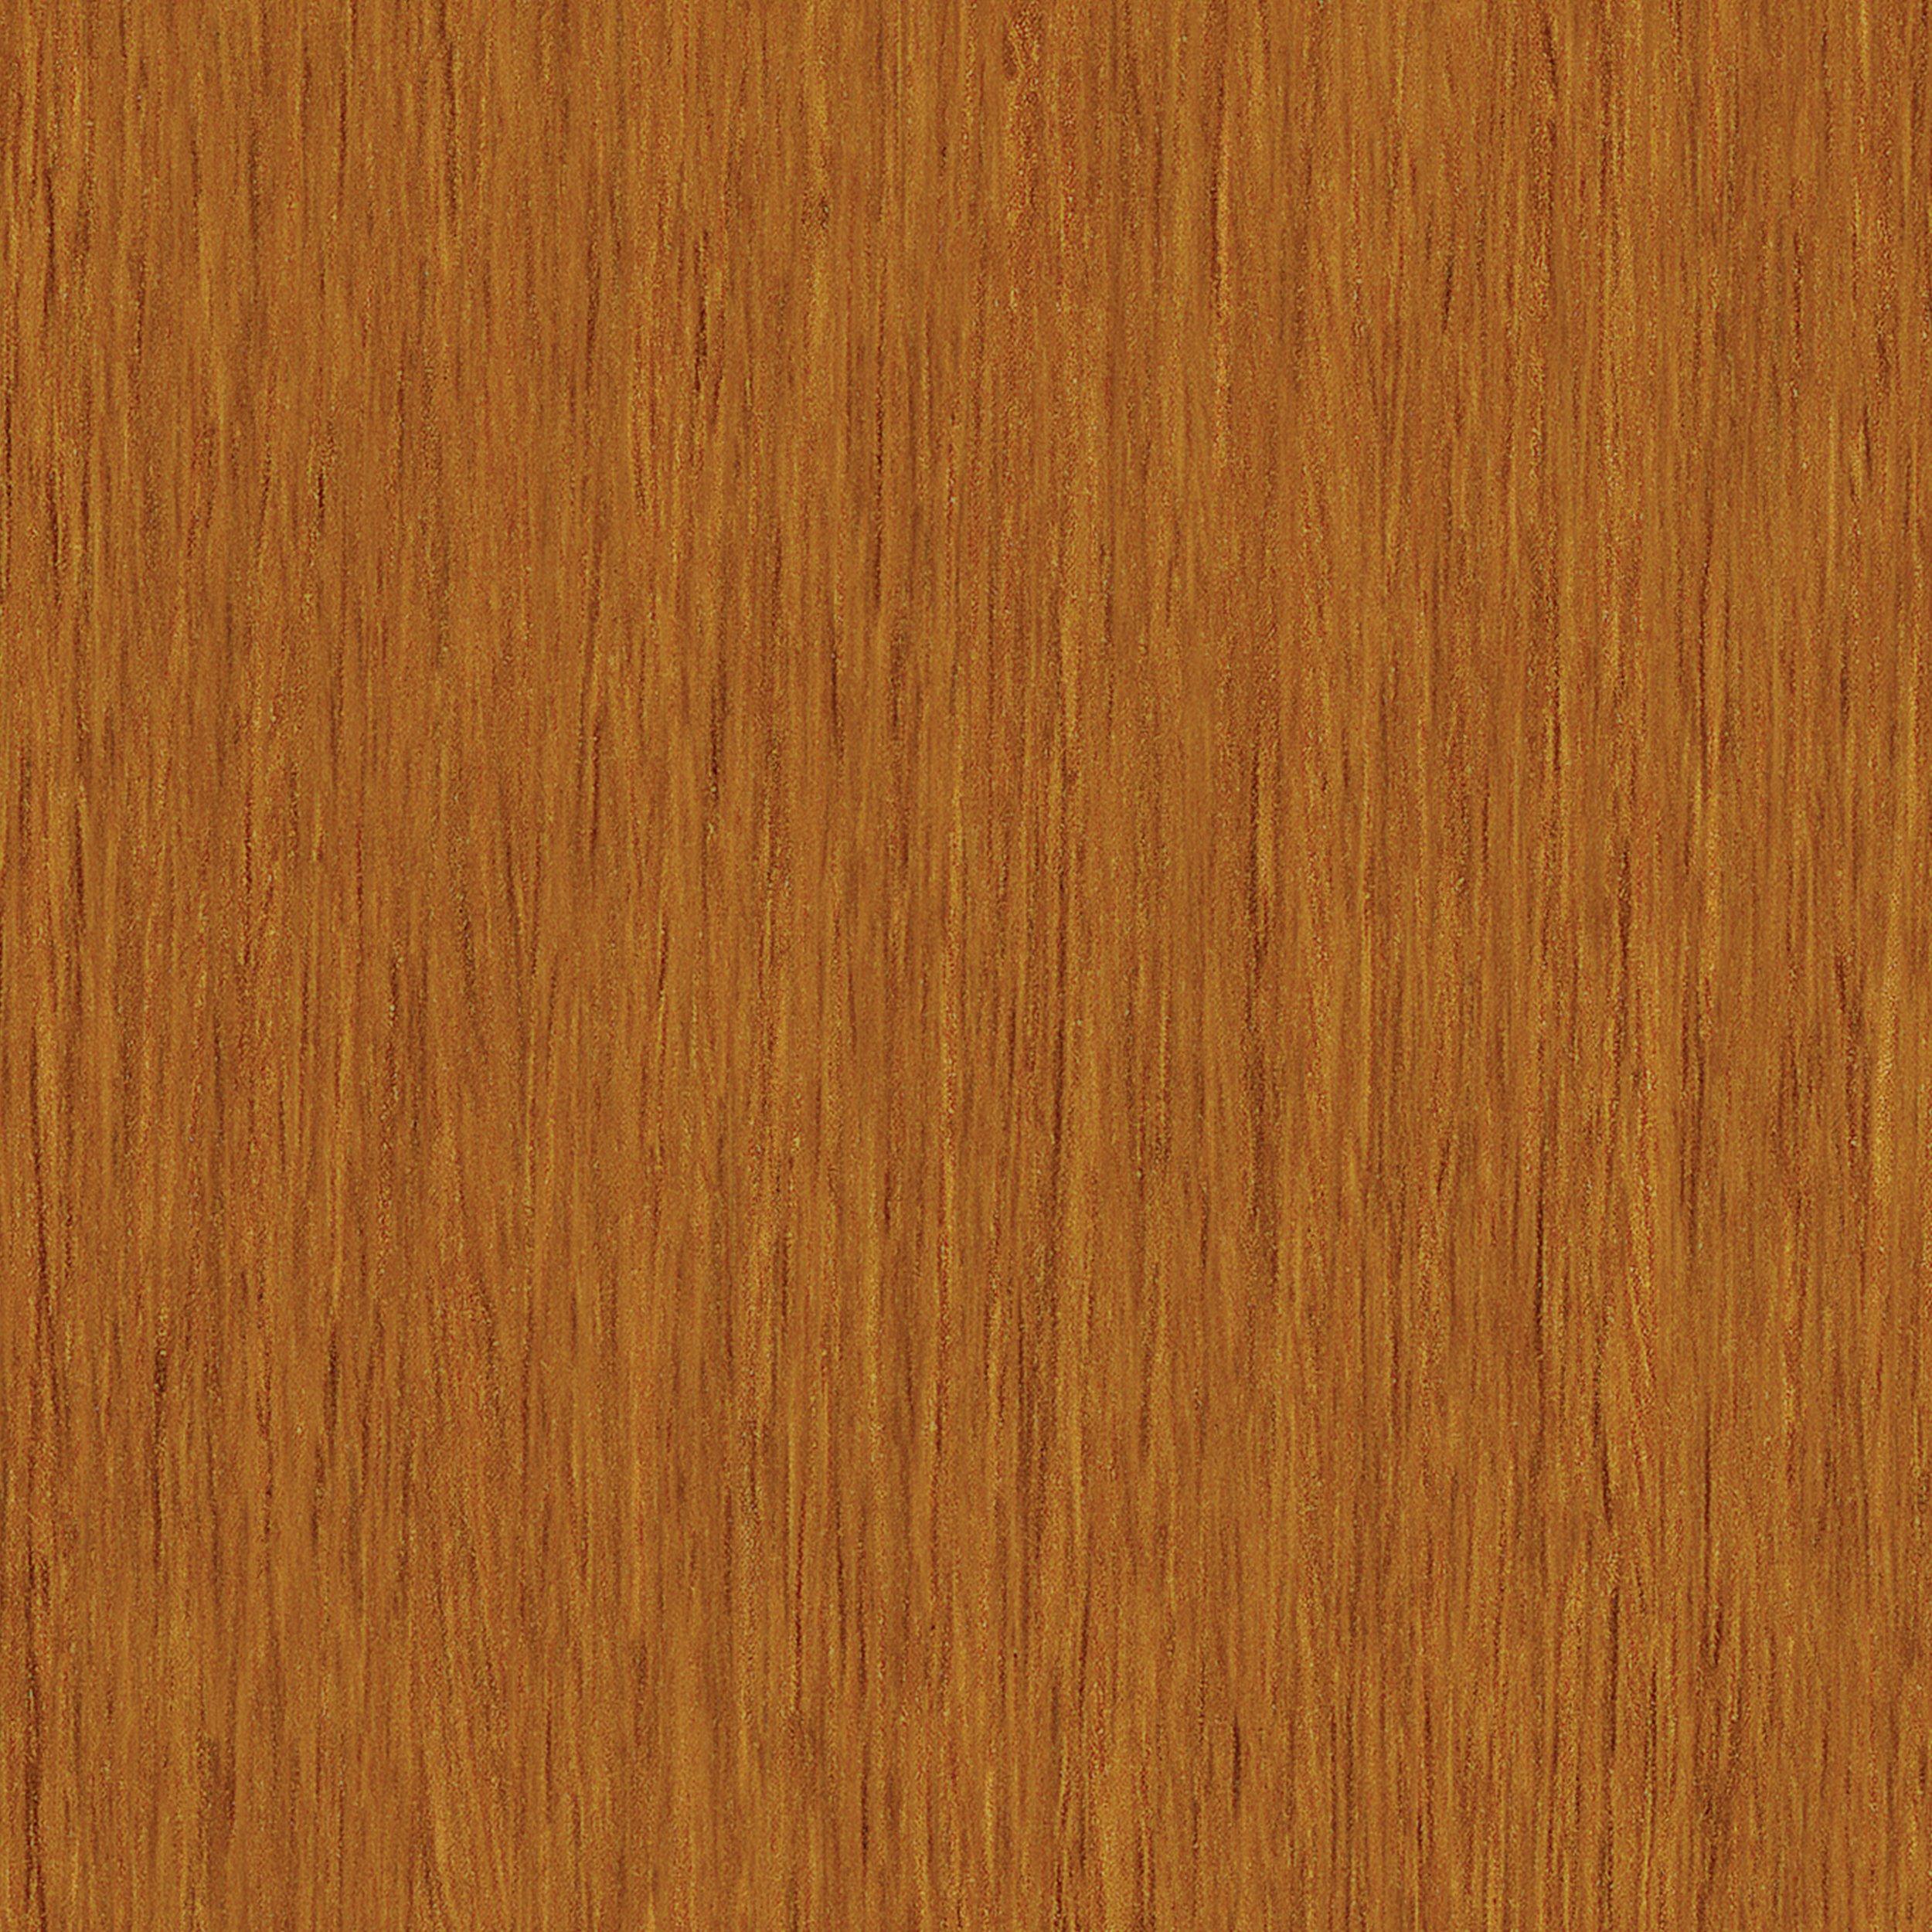 Ginger Oak High Gloss 94in. Laminate Overlapping Stair Nose